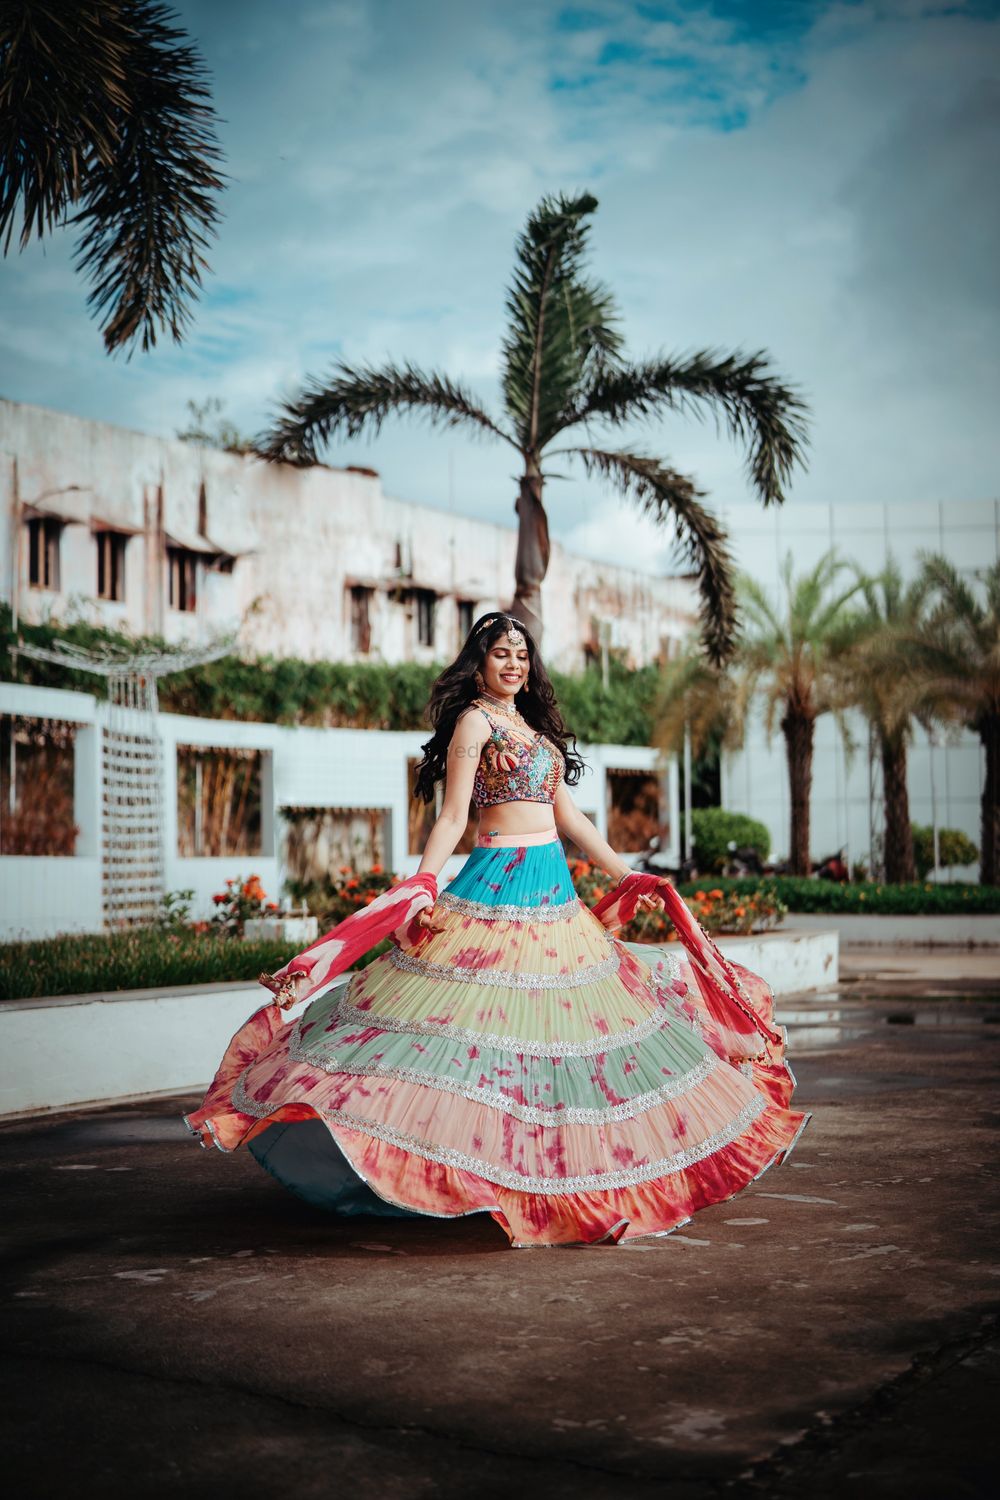 Photo of Bride twirling in a colorful Mehndi lehenga